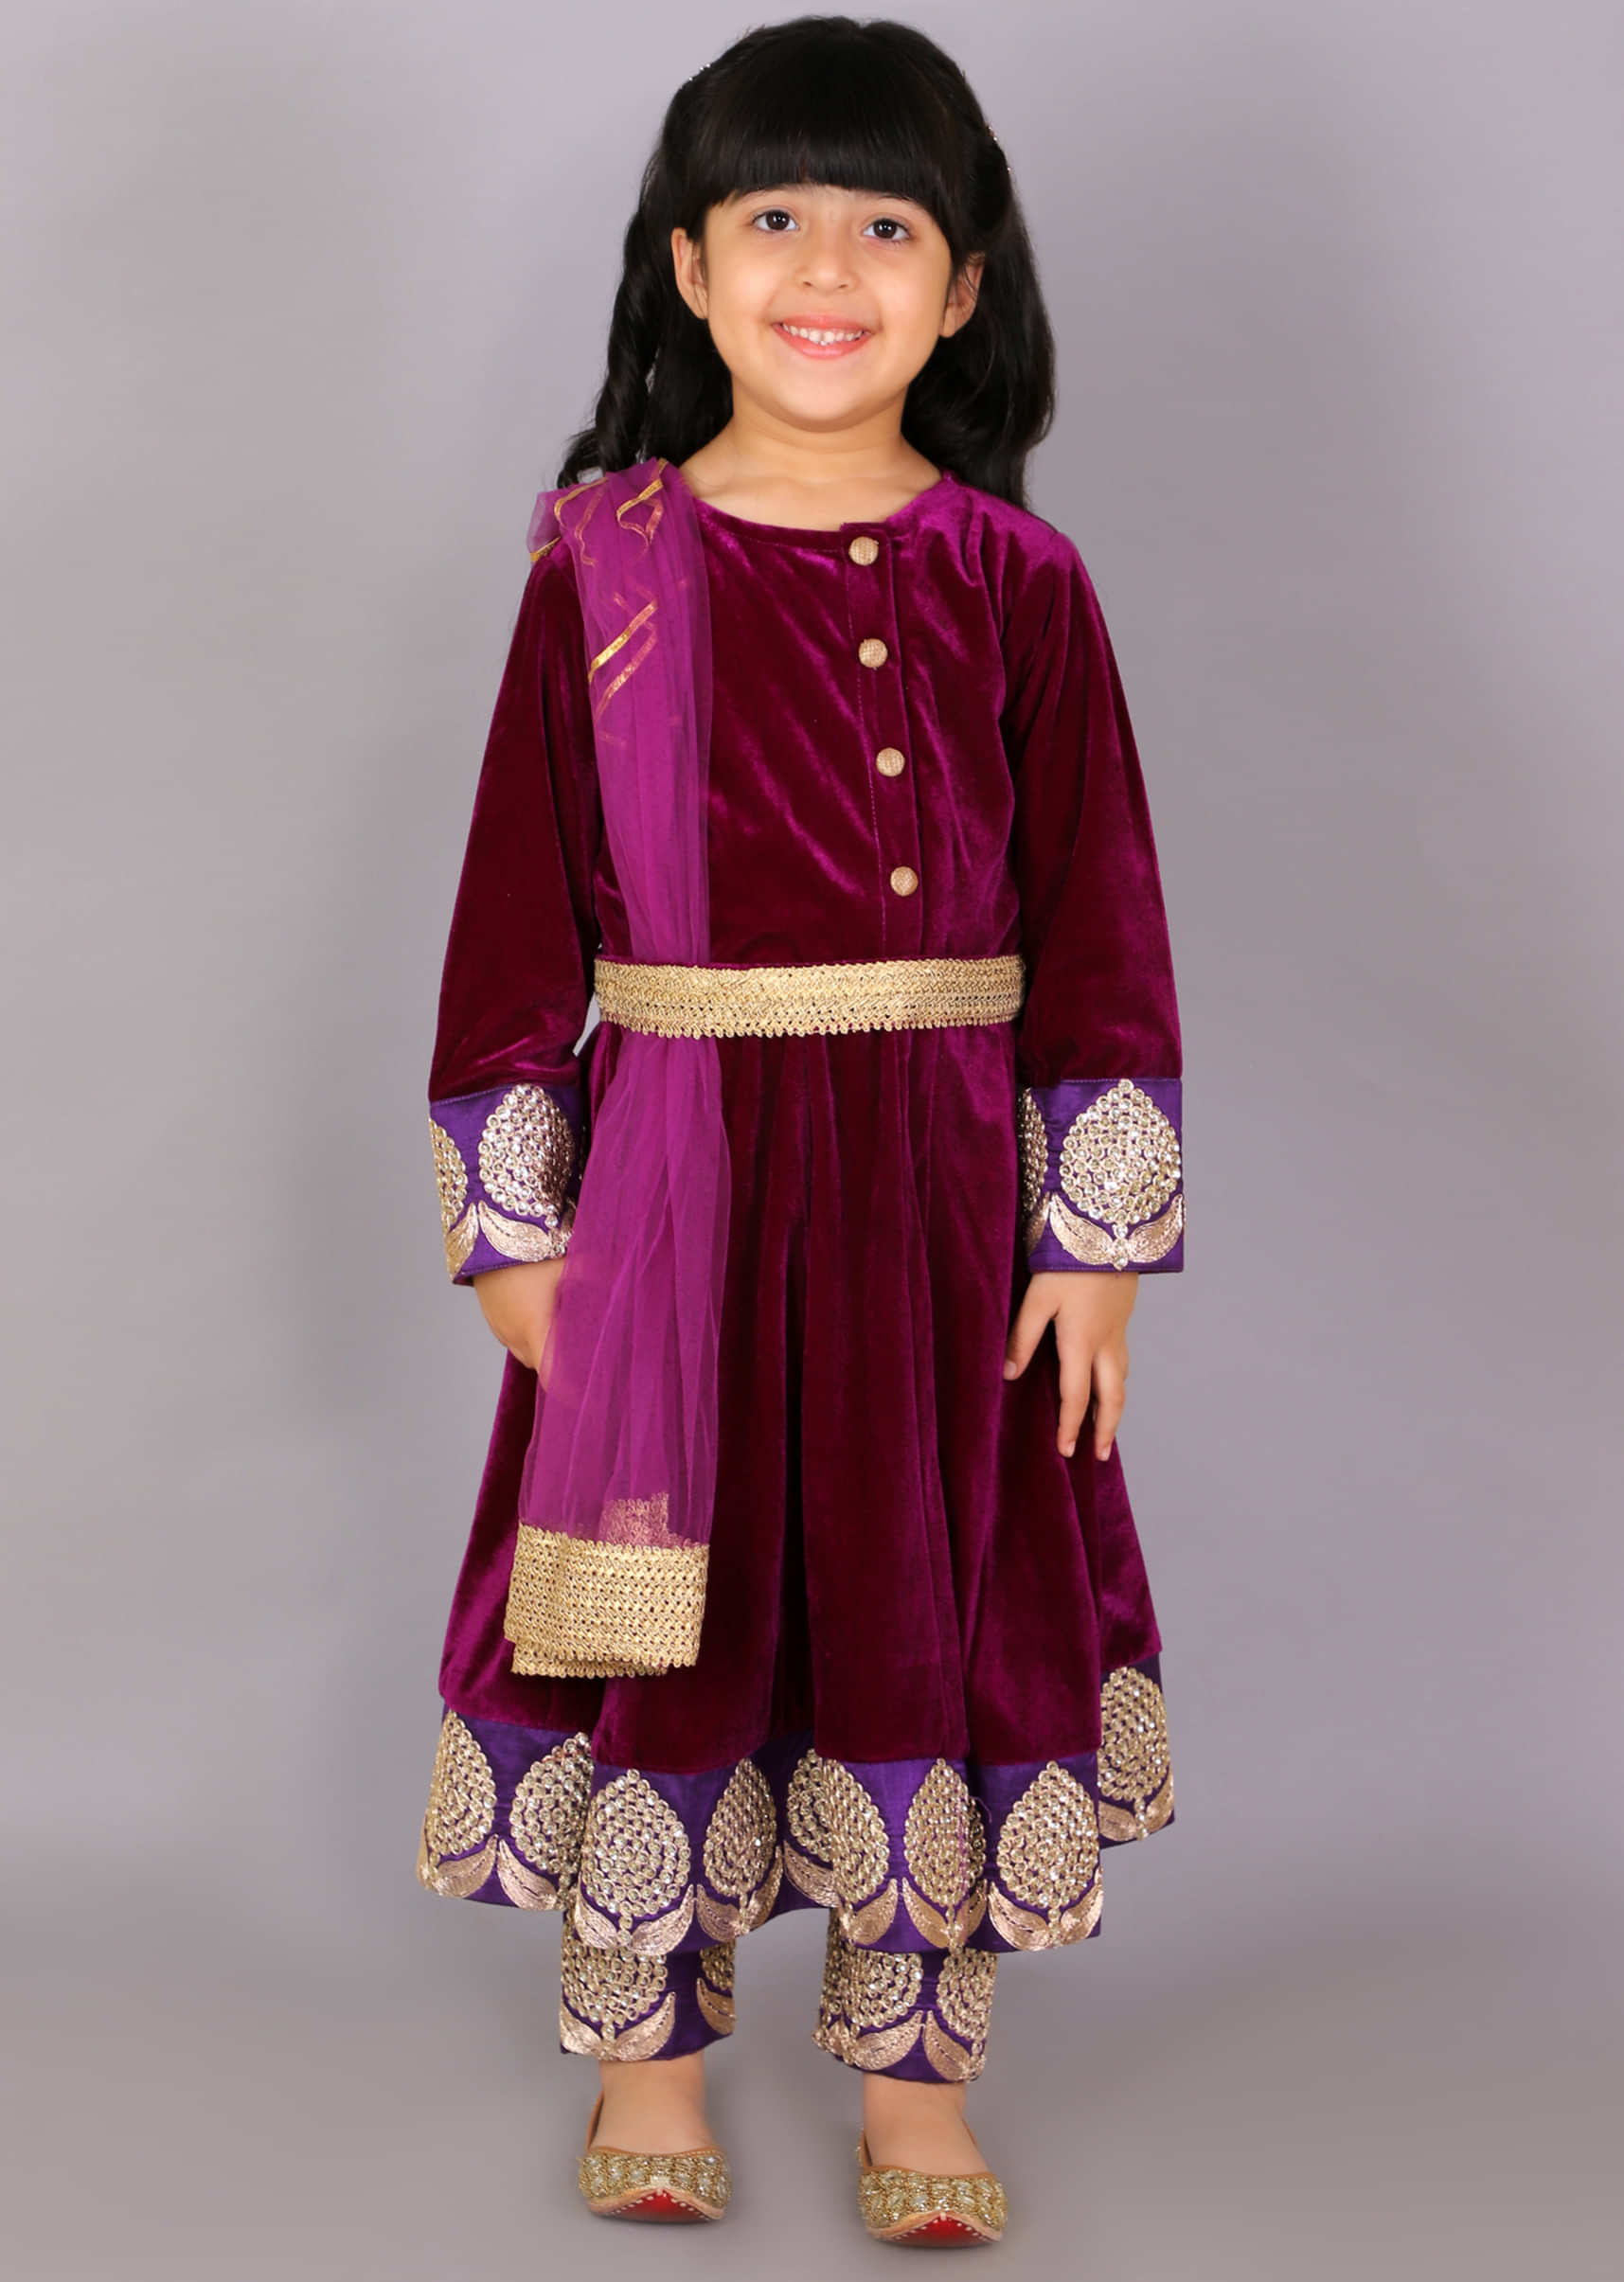 Kalki Girls Purple Anarkali Suit In Velvet With Antique Lace At The Waist And Embroidered Border